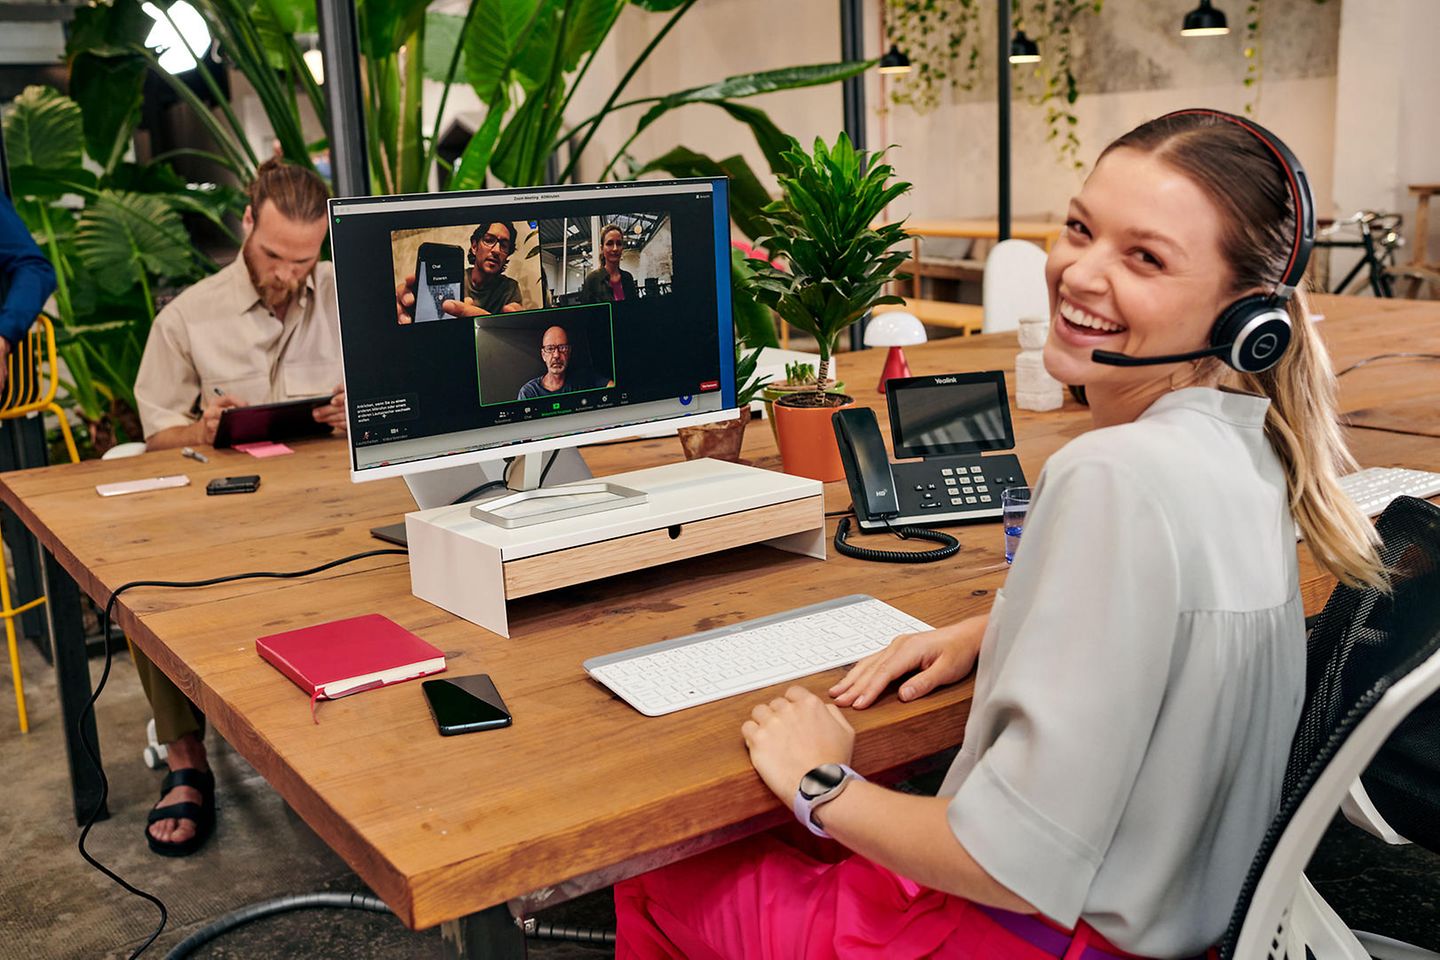 A woman sits in an office and takes part in a video conference. She smiles at the camera.